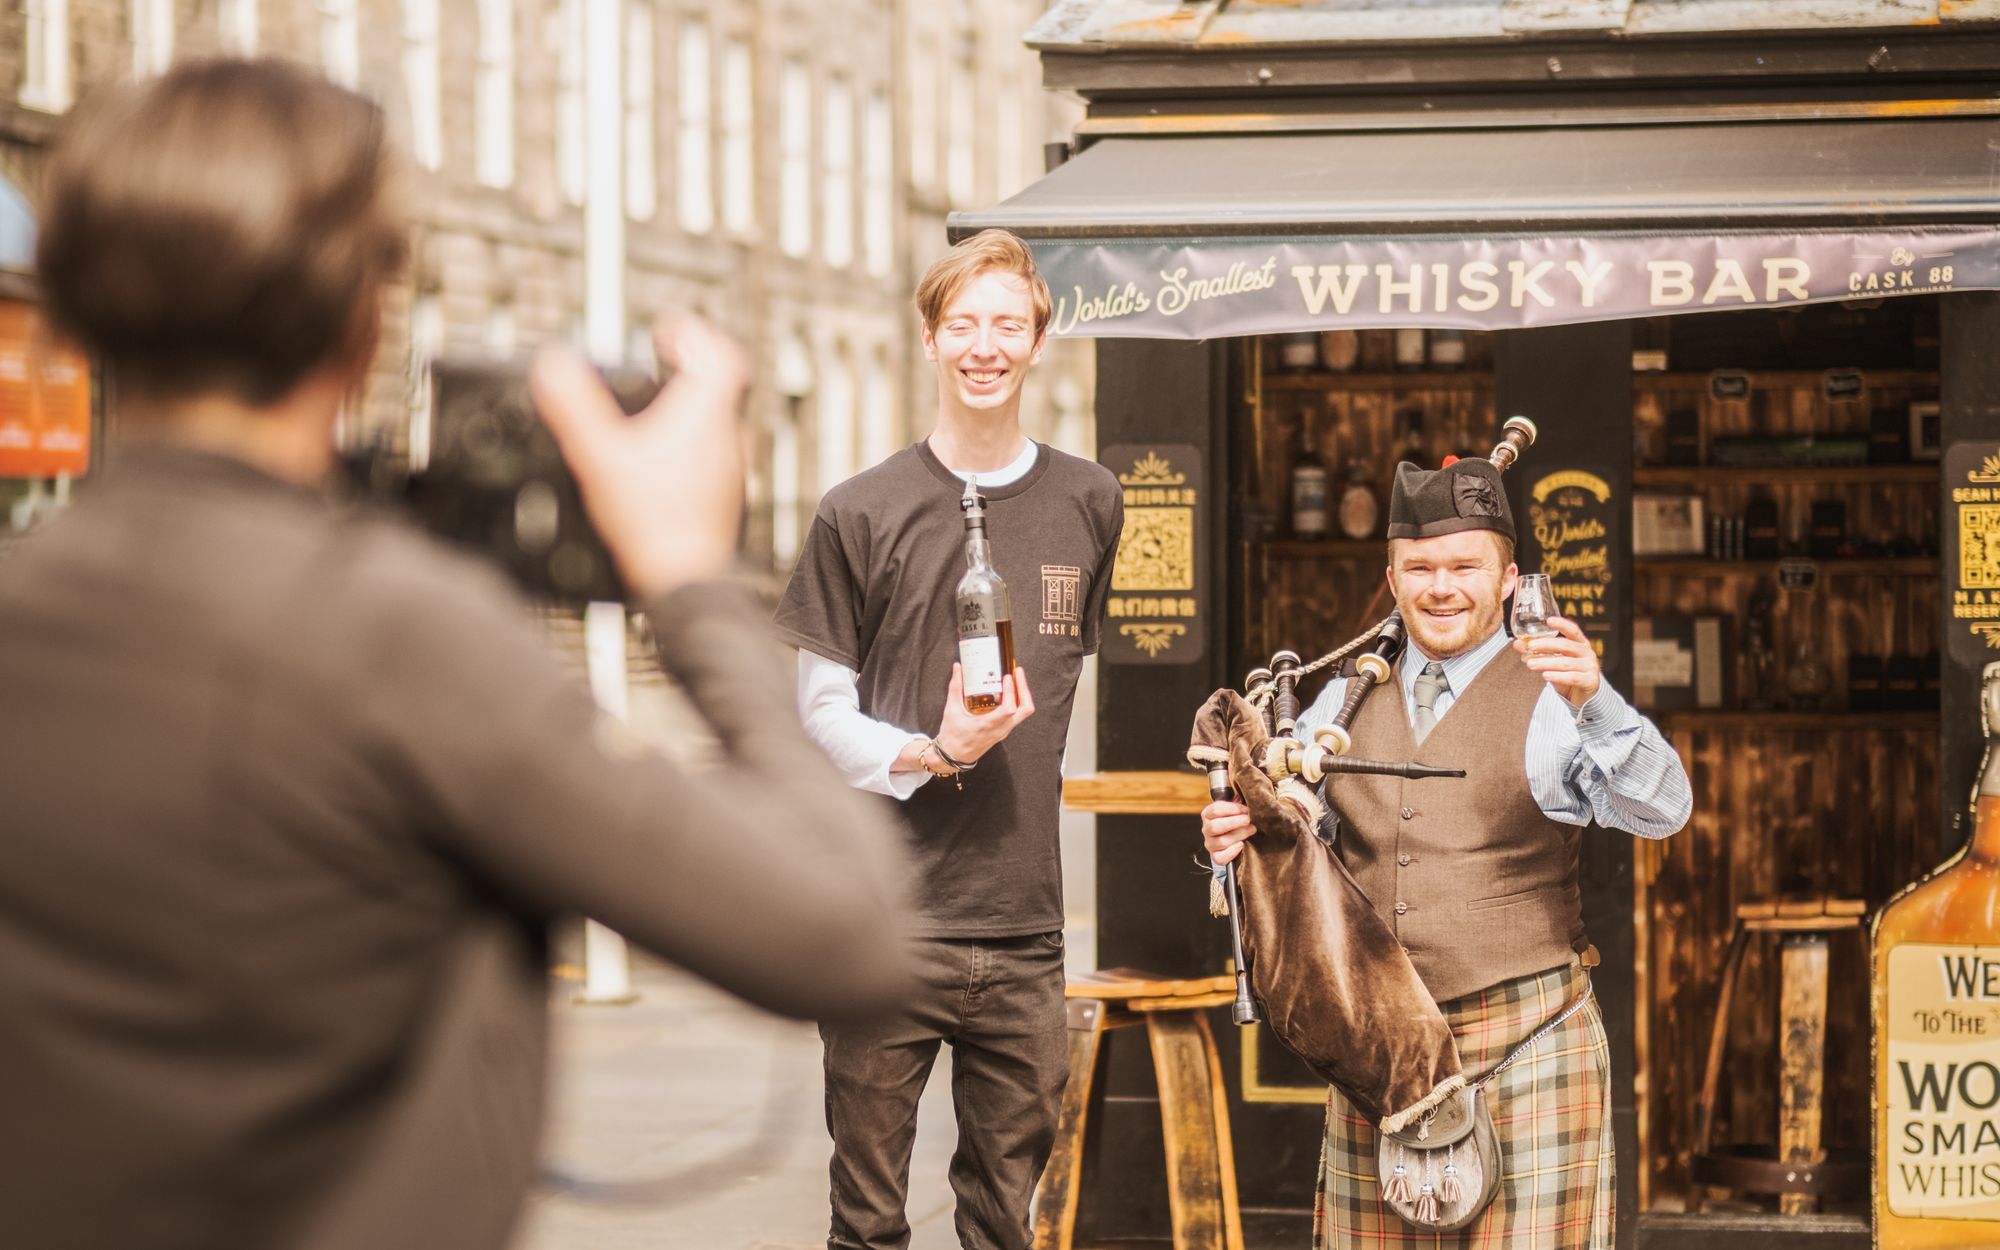 Bartender Mark Young with bagpiper Grant Grant MacLeod, outside the World's Smallest Whisky Bar